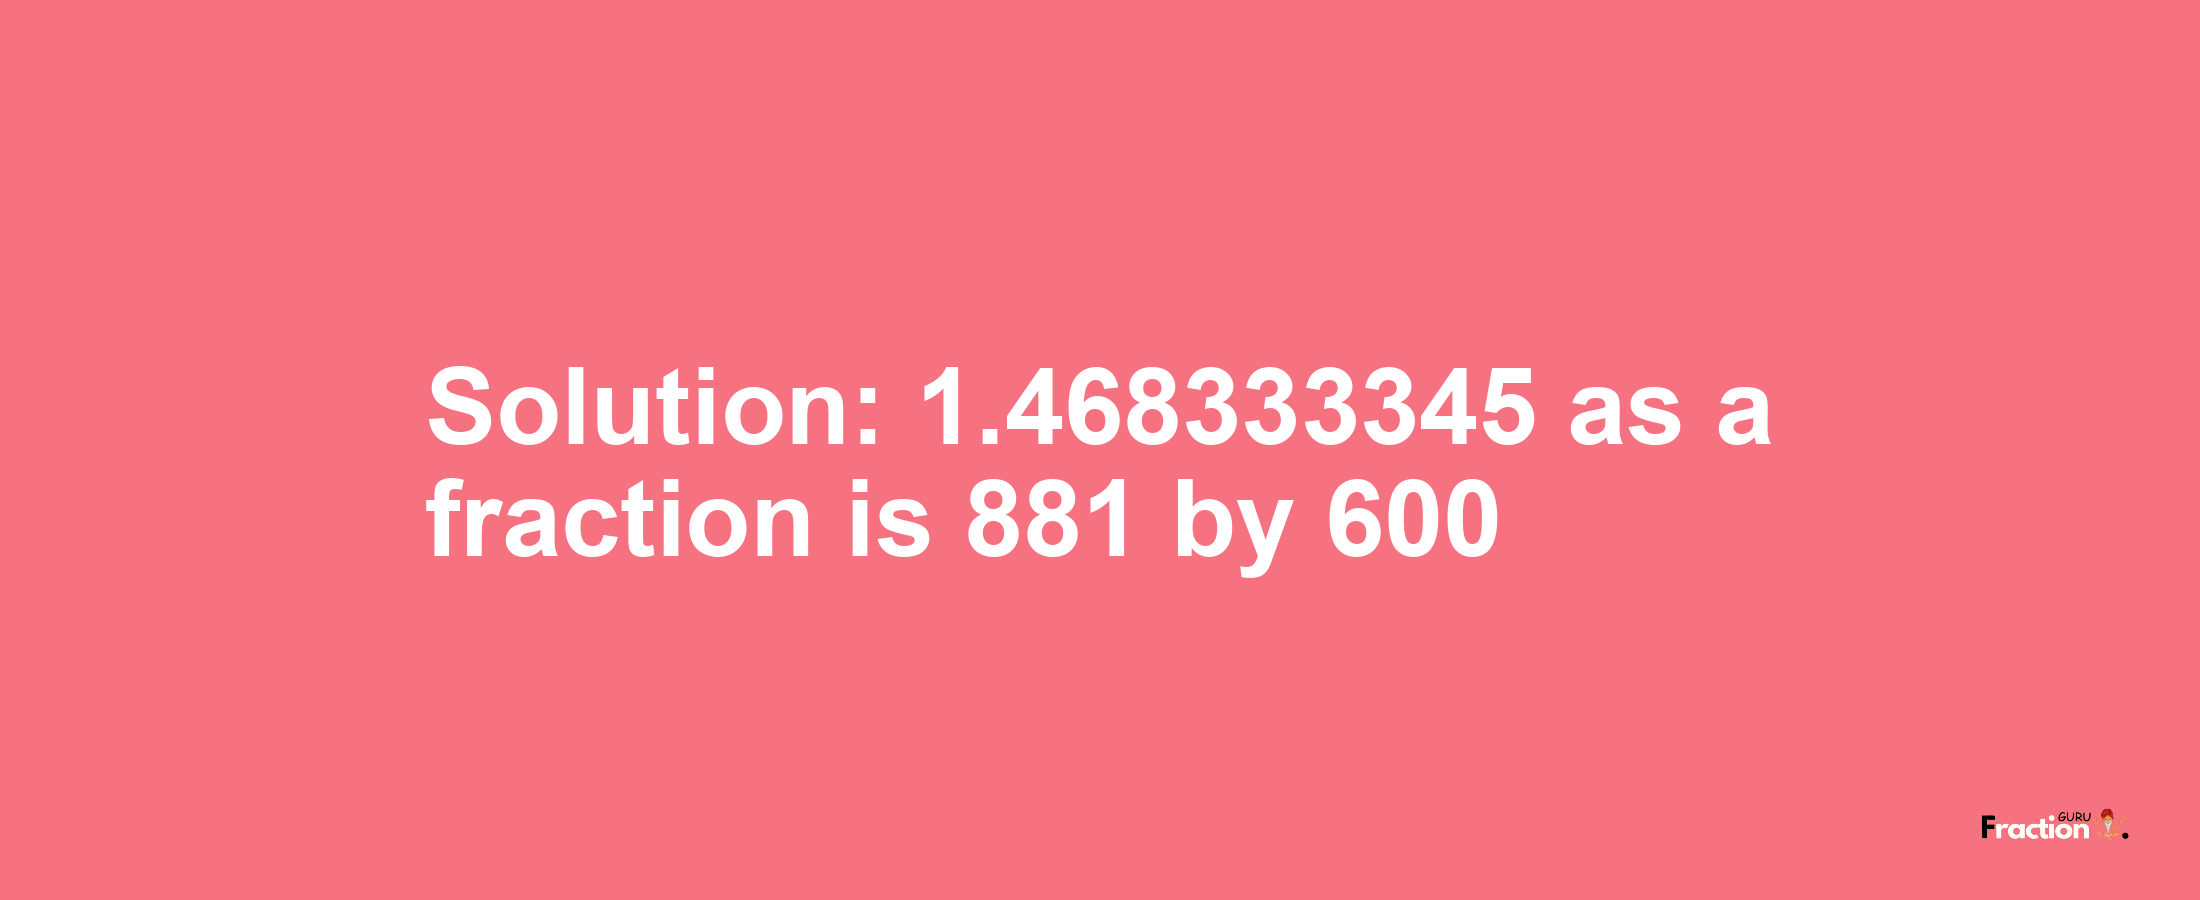 Solution:1.468333345 as a fraction is 881/600